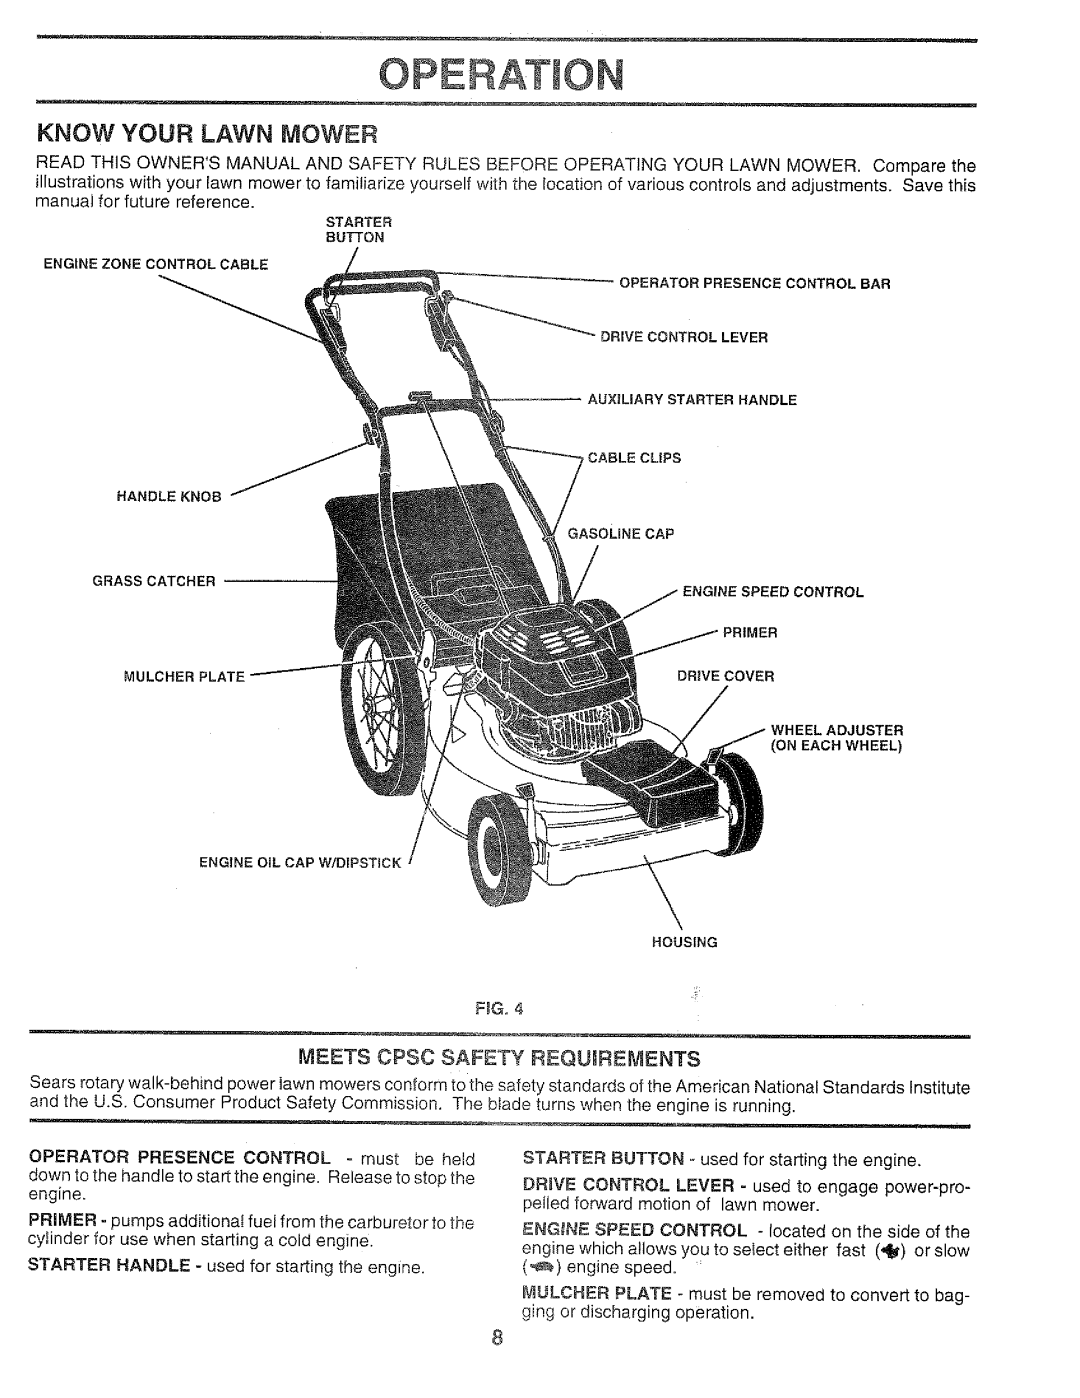 Craftsman 917.37459 owner manual Know Your Lawn Mower, Operation, Meets Cpsc Safety Requnrements 